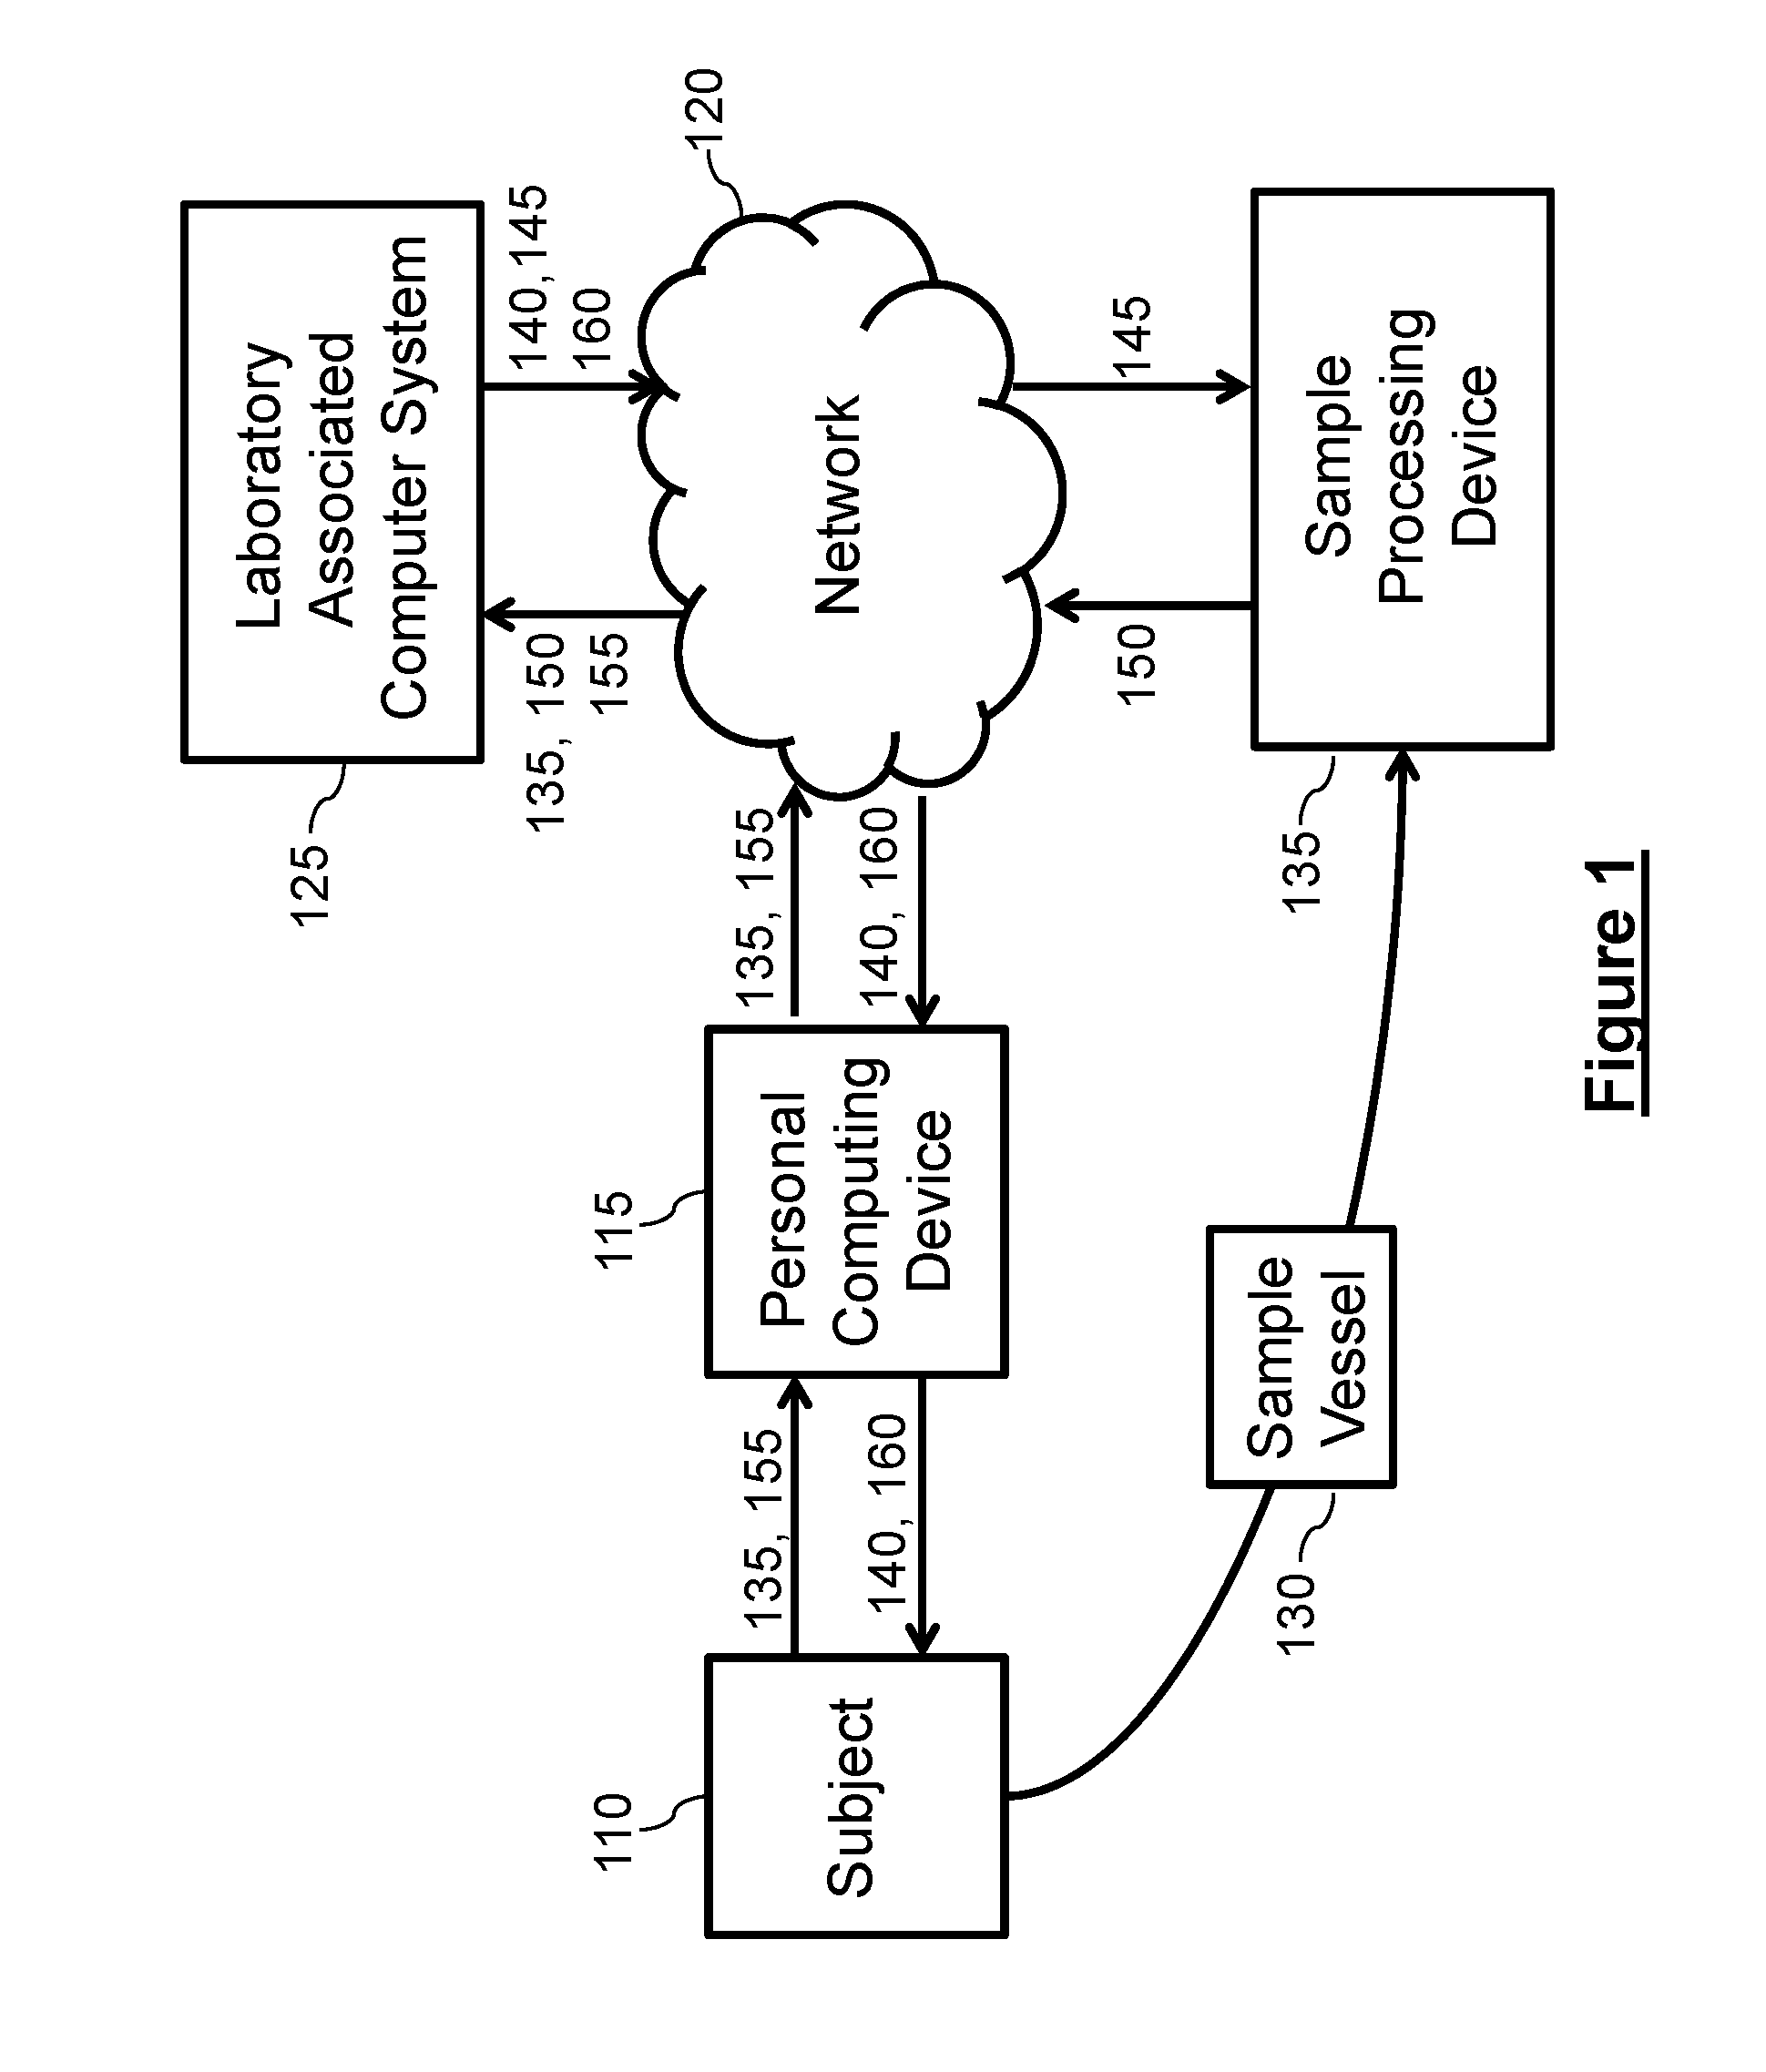 Systems and methods for ordering laboratory tests and providing results thereof